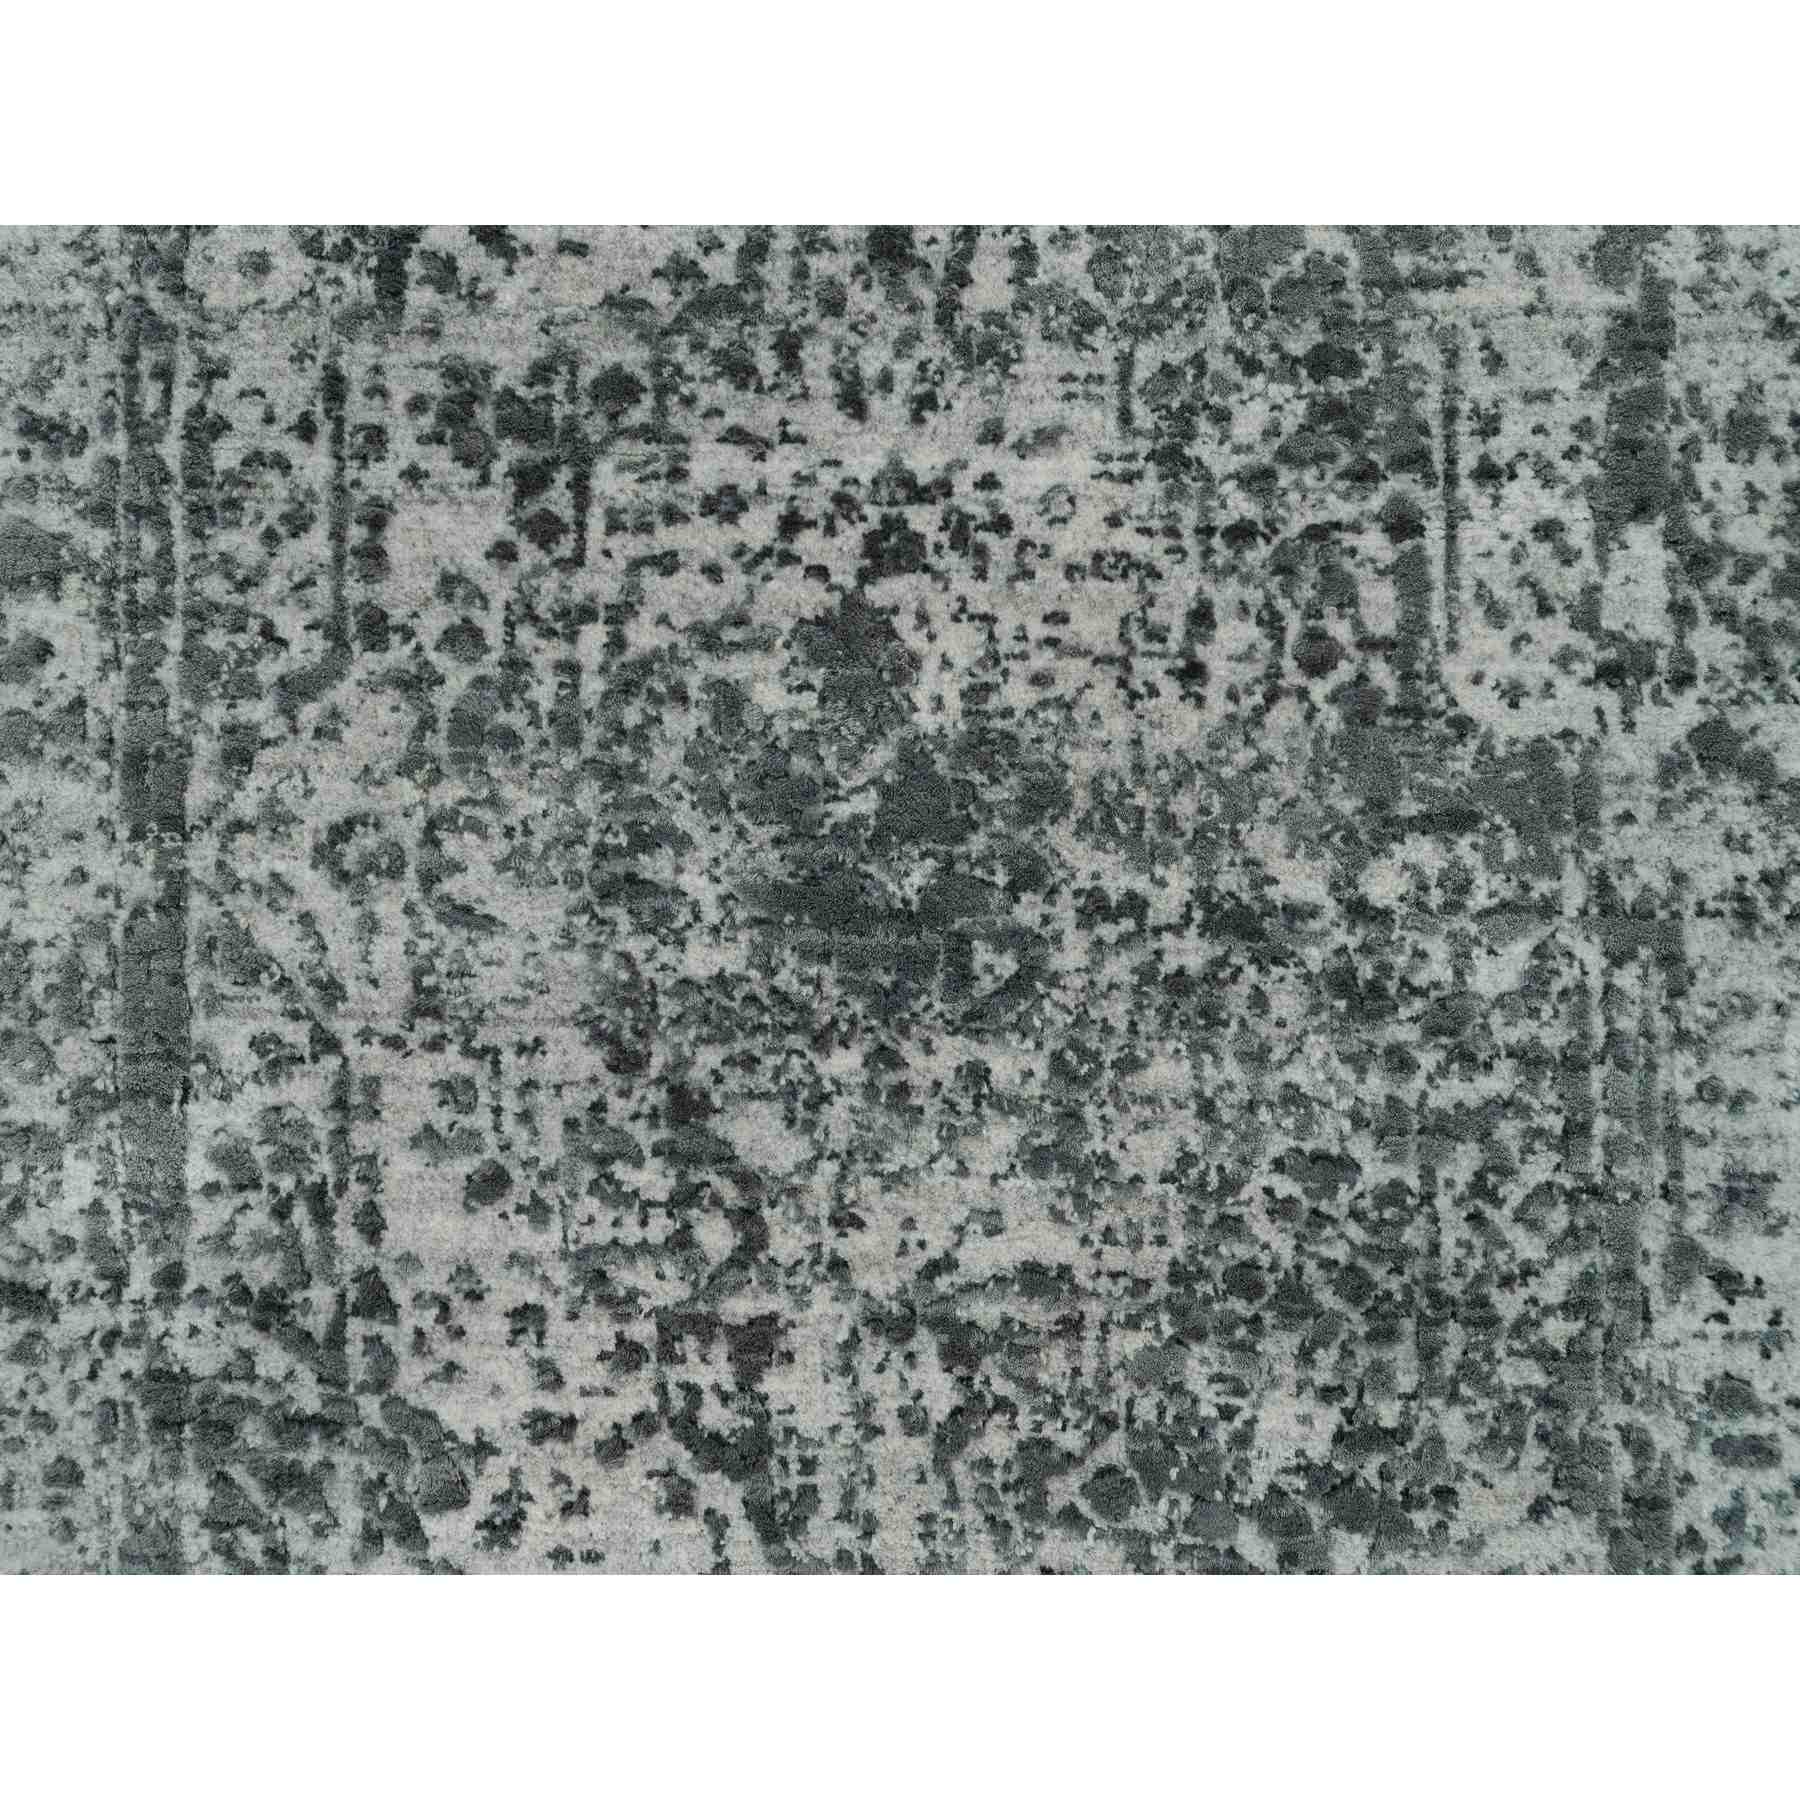 Transitional-Hand-Knotted-Rug-451040